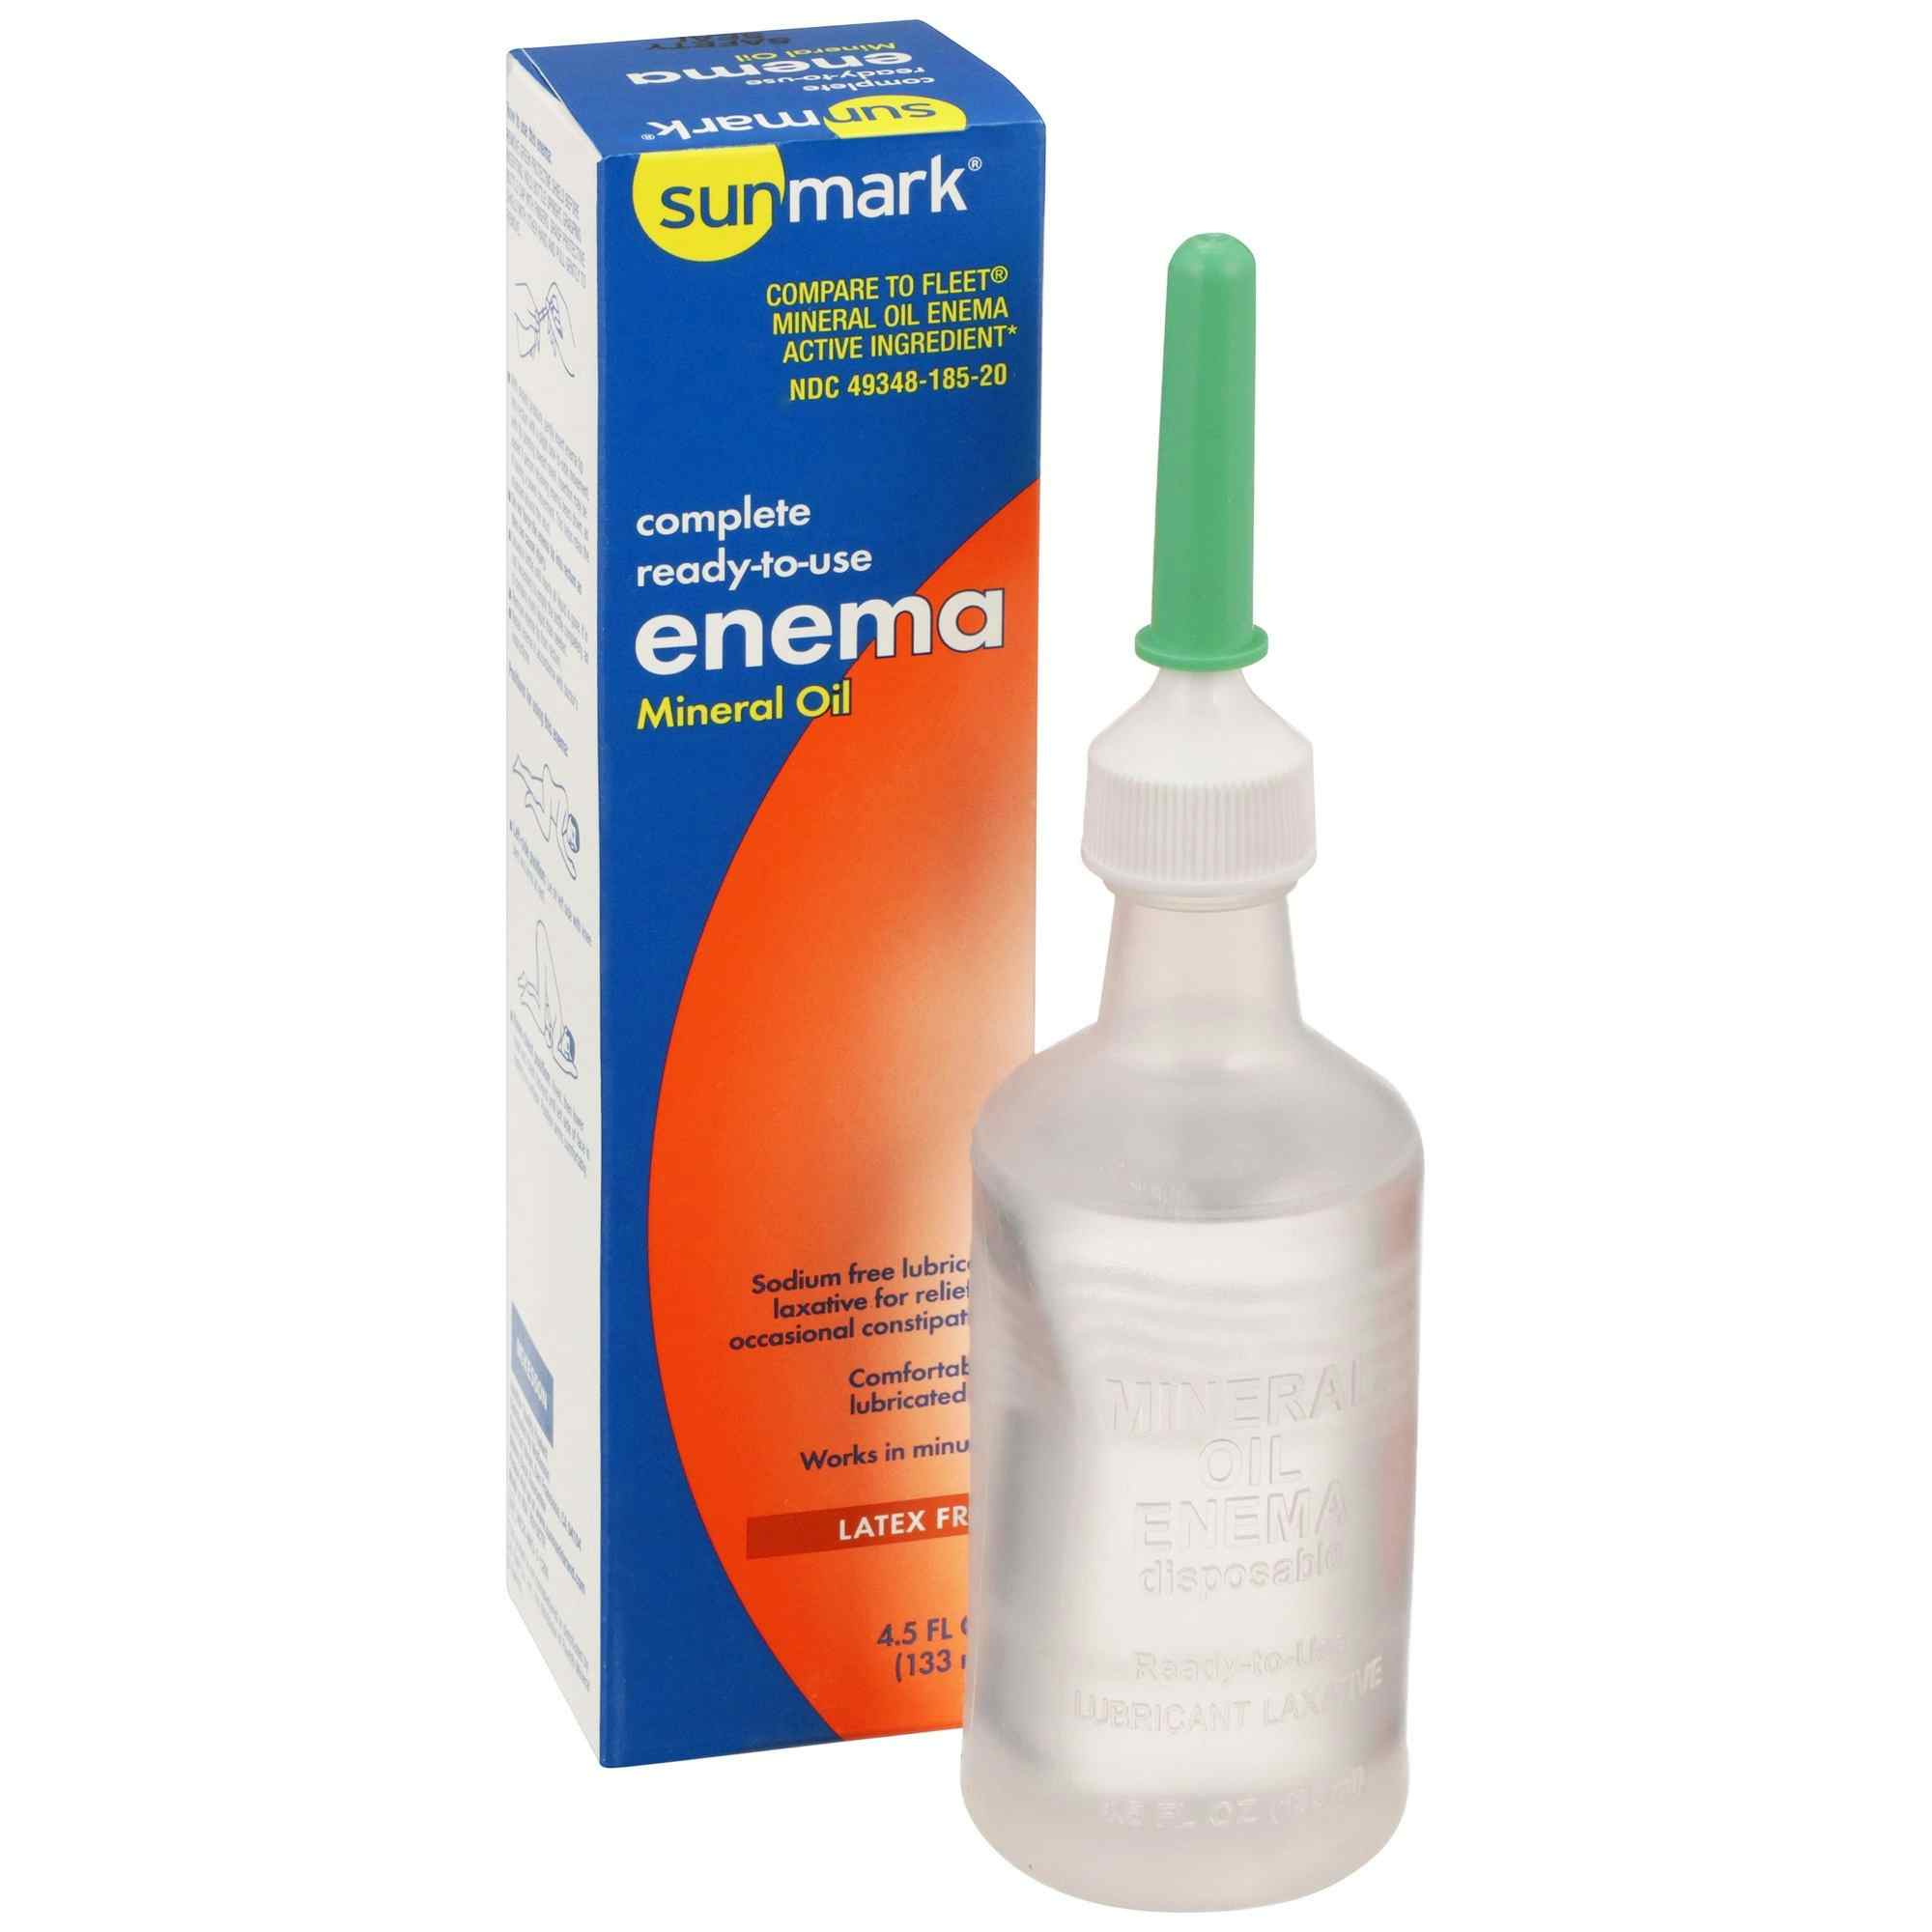 sunmark Complete Ready-To-Use Mineral Oil Enema